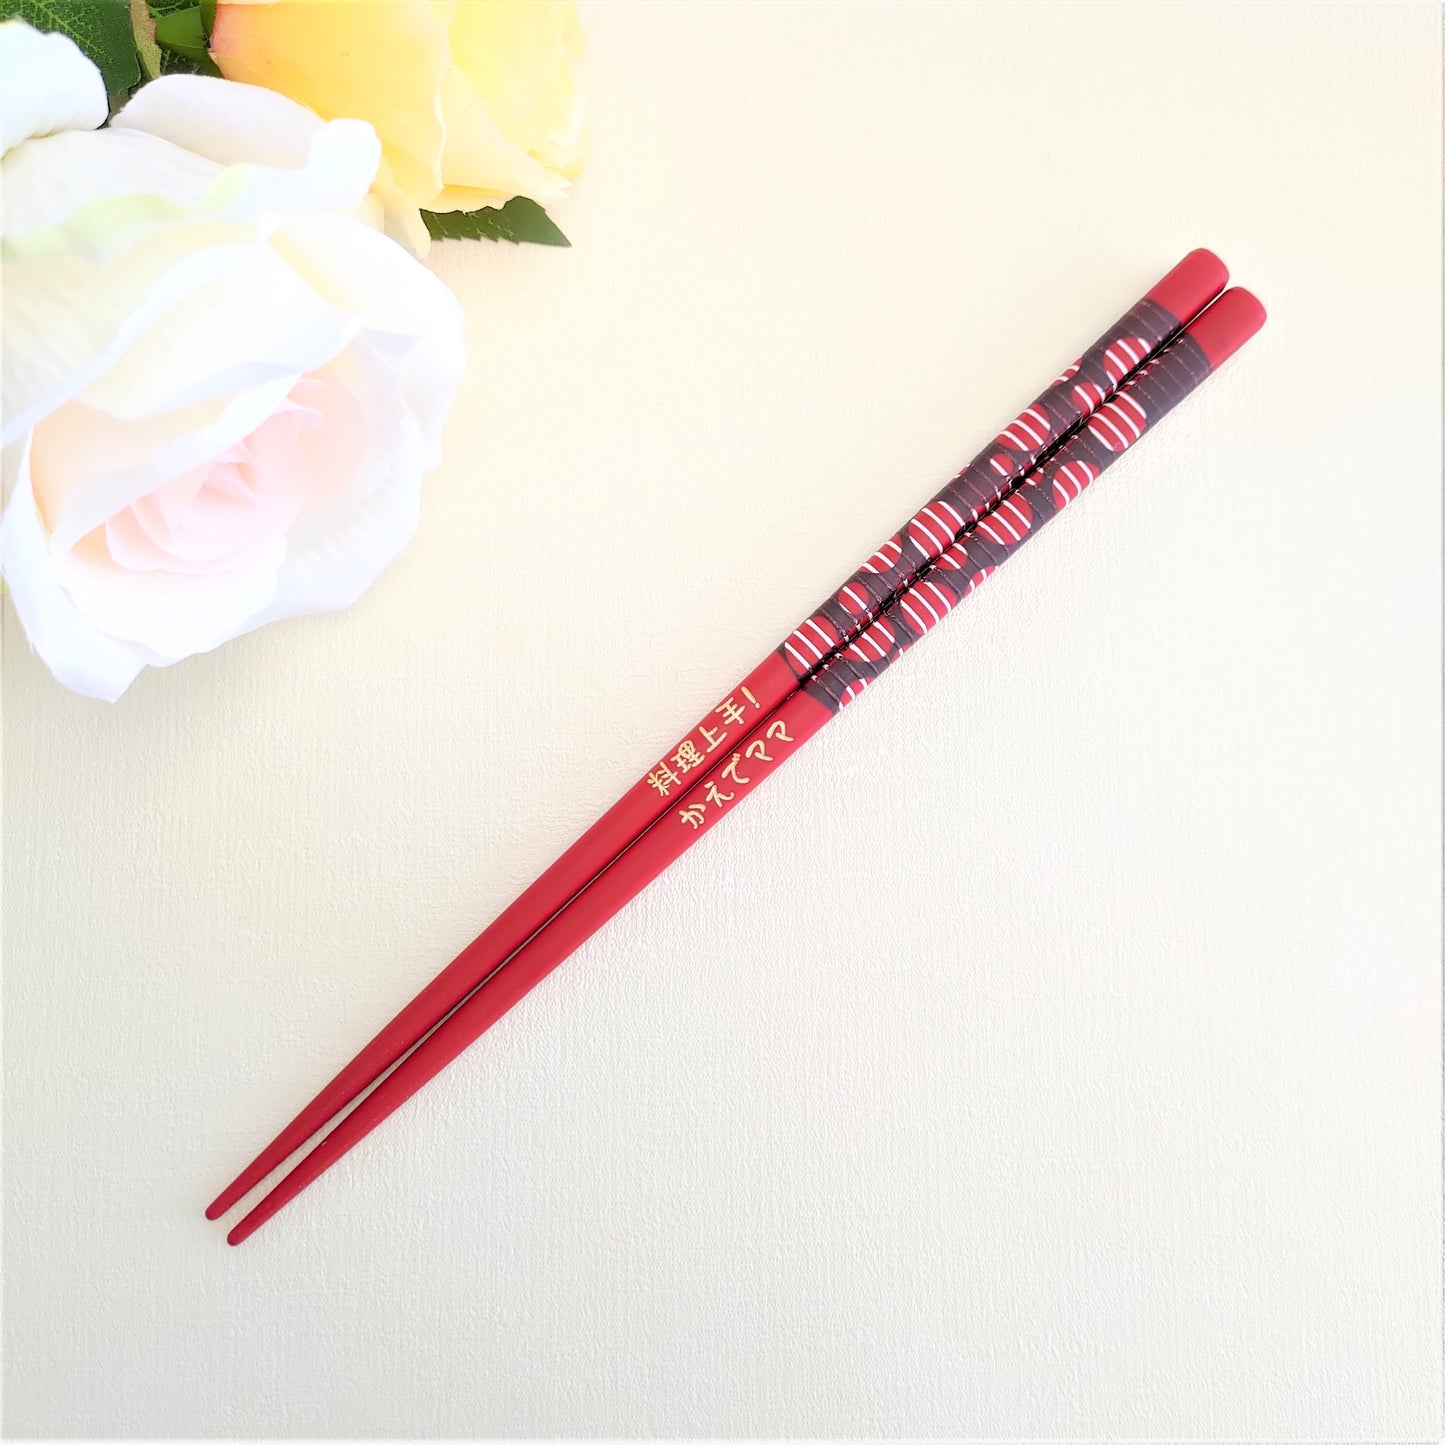 Polka dots original design Japanese chopsticks black red - DOUBLE PAIR WITH ENGRAVED WOODEN BOX SET